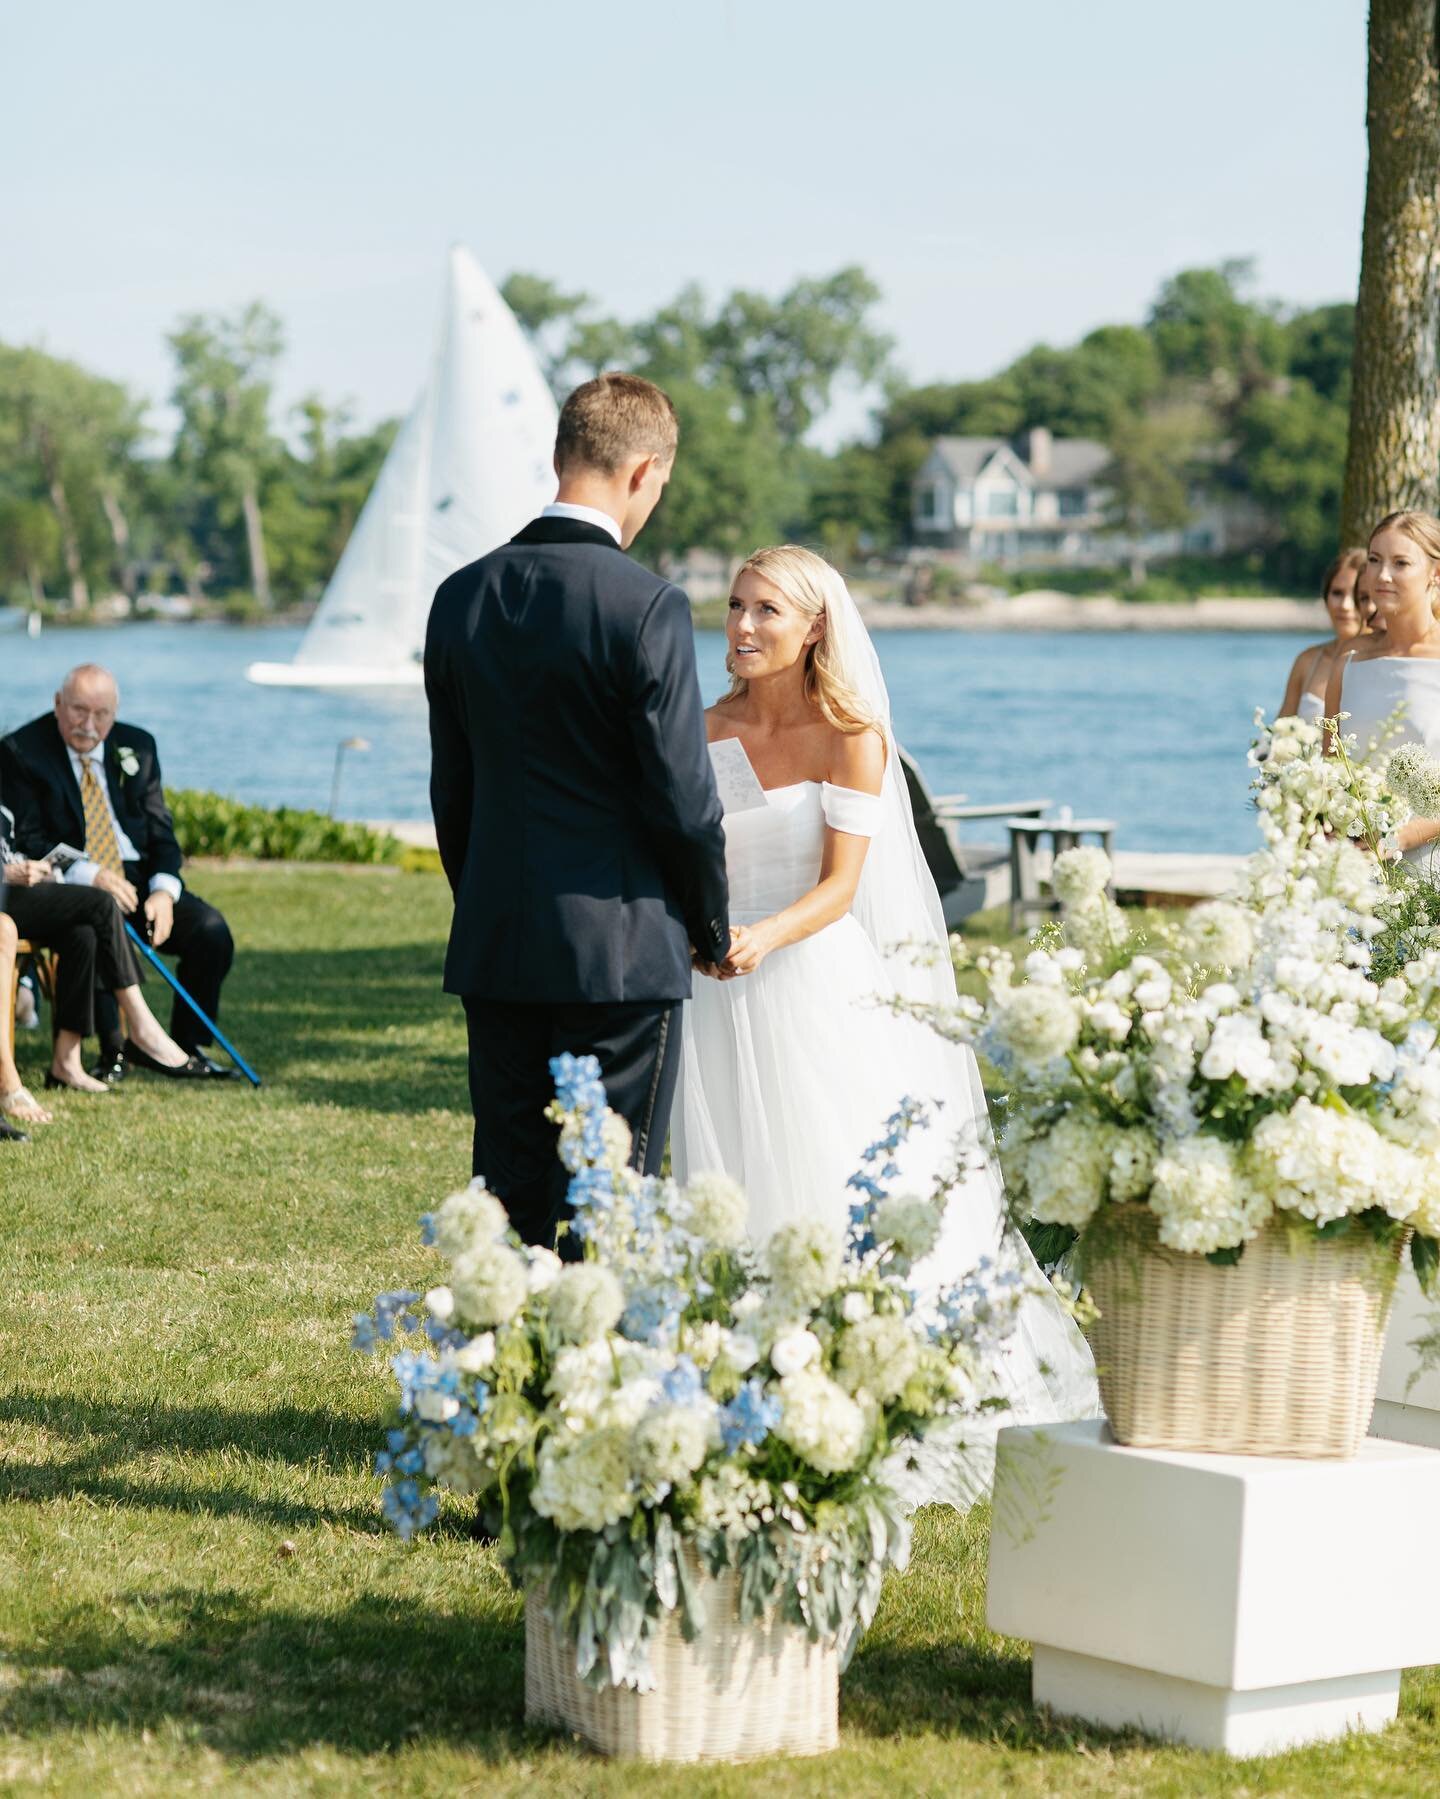 It&rsquo;s only October and we&rsquo;re already reminiscing on Minnesota summers over here &mdash; when the water is sparkling and the sun is shining ☀️⛵️ A few more photos from Grace and Griffin&rsquo;s gorgeous island ceremony!